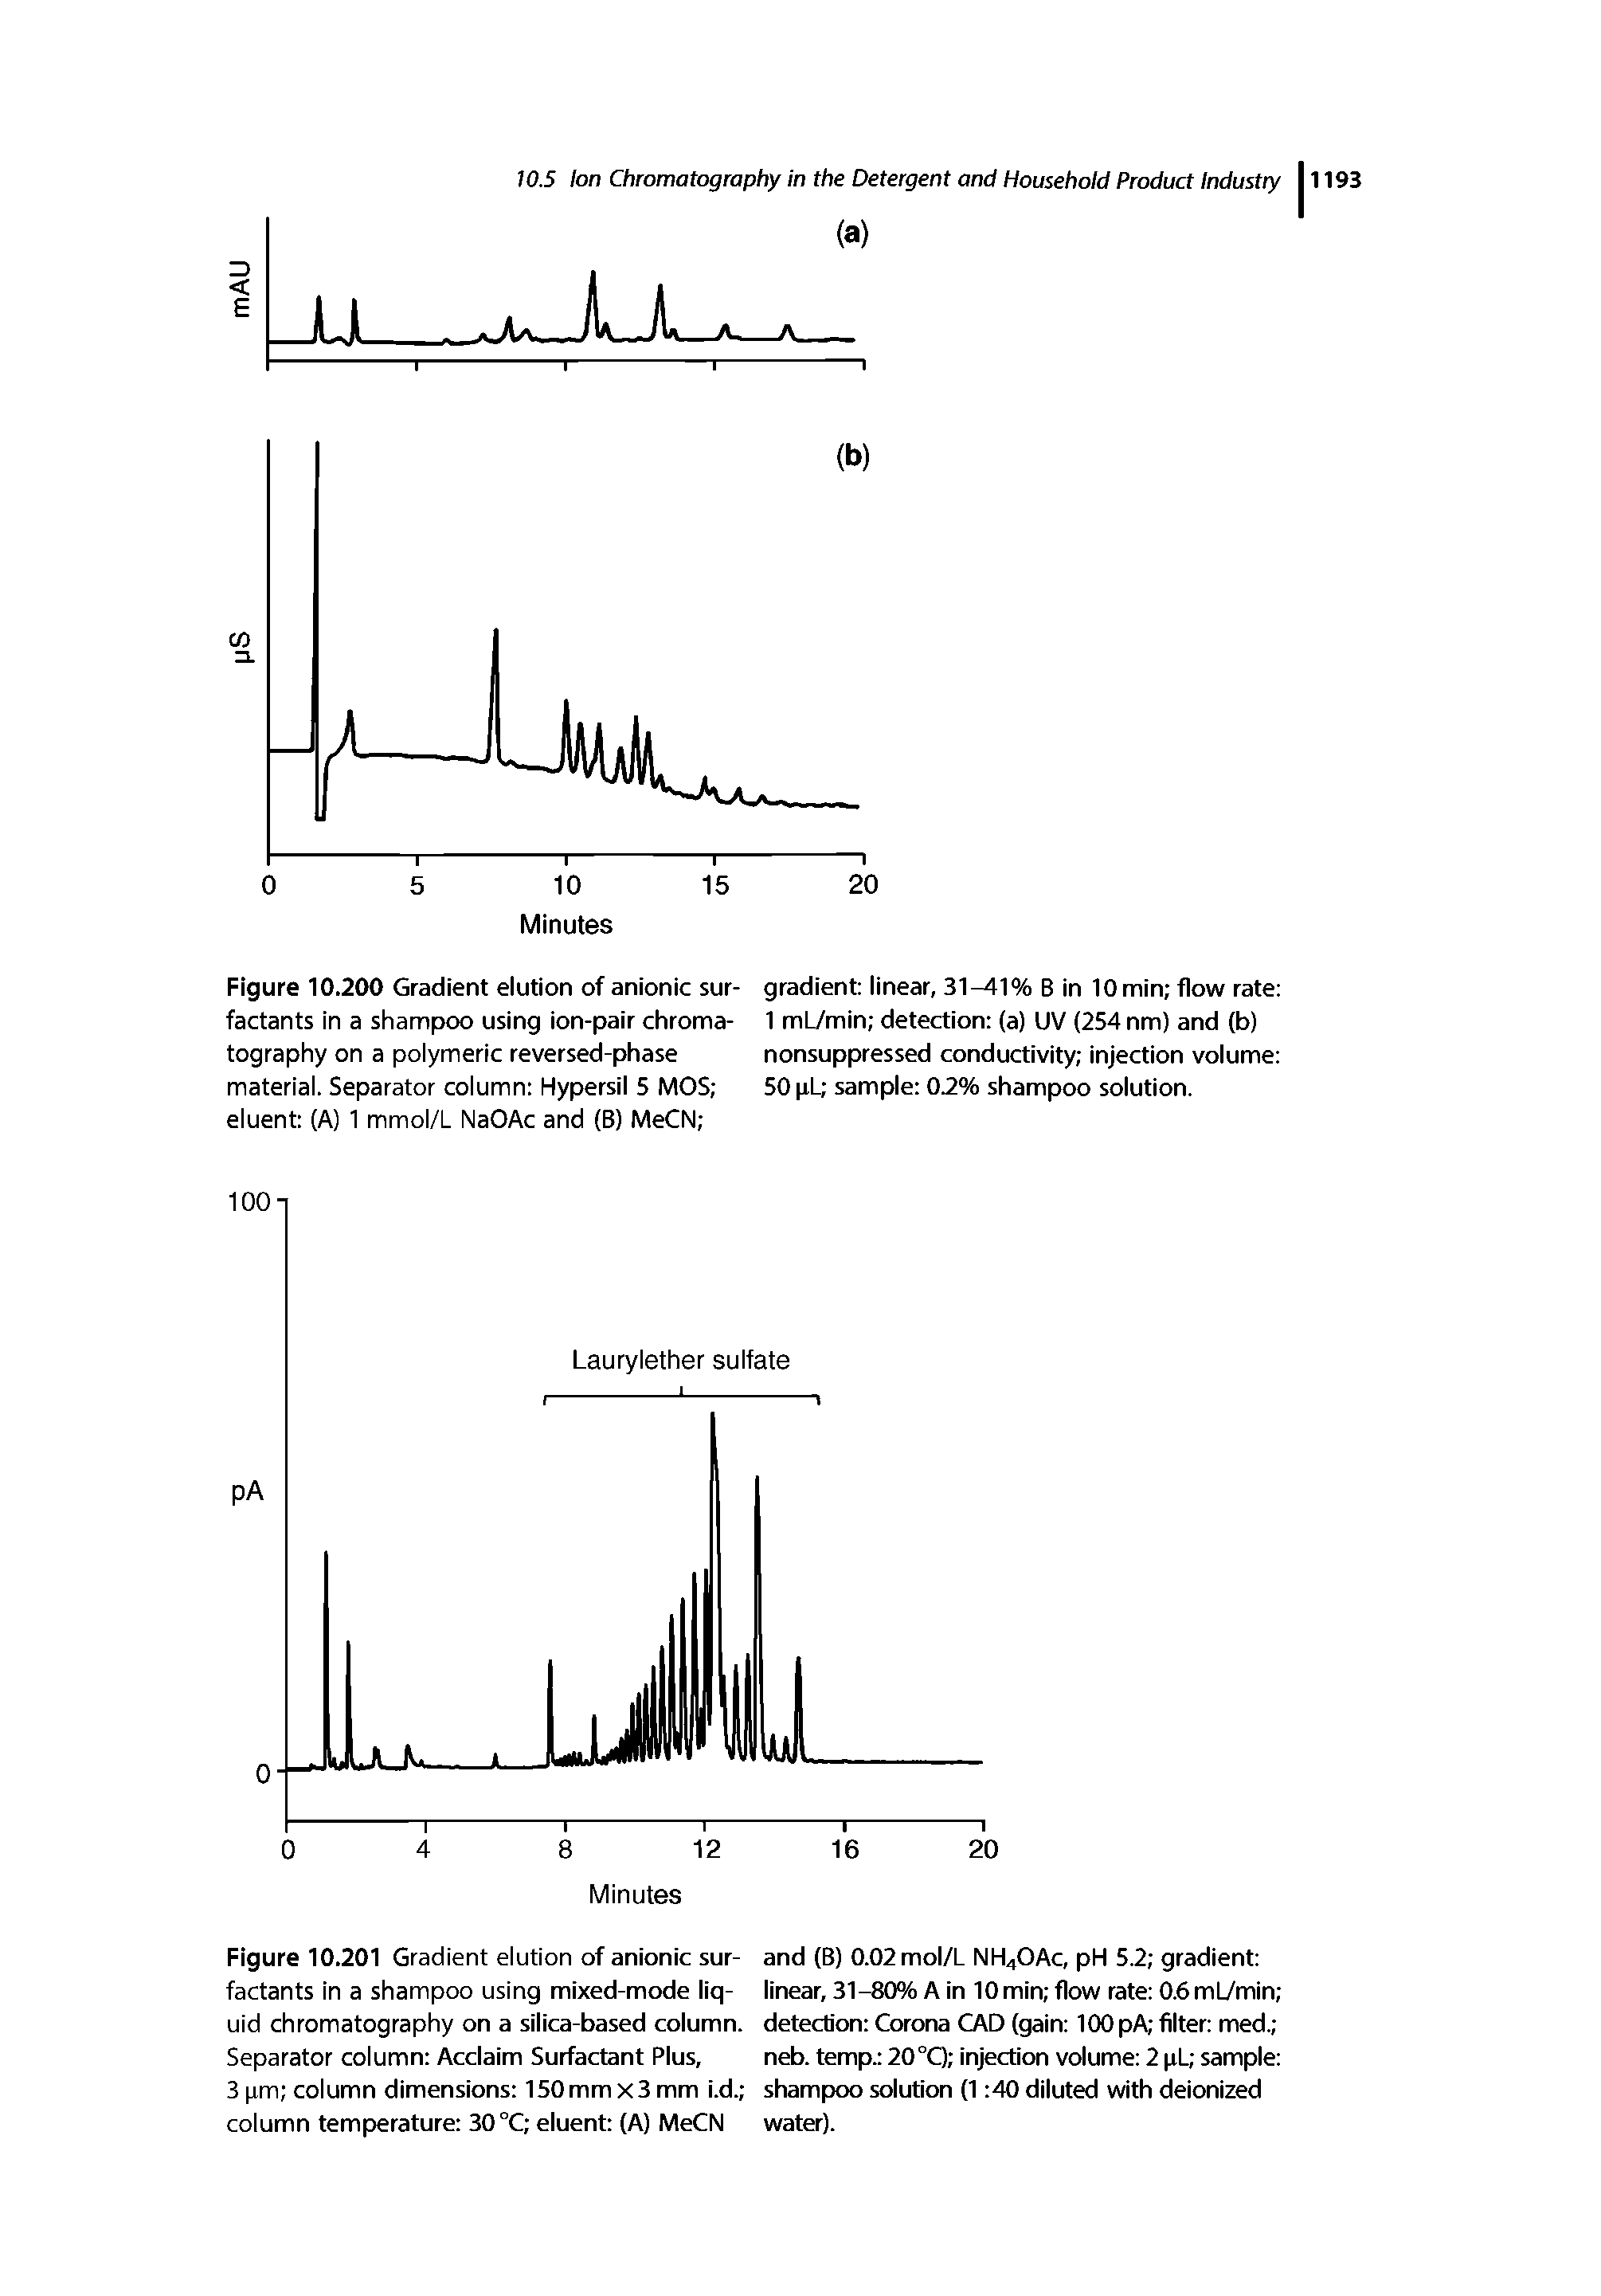 Figure 10.201 Gradient elution of anionic surfactants in a shampoo using mixed-mode liquid chromatography on a silica-based column. Separator column Acclaim Surfactant Plus,...